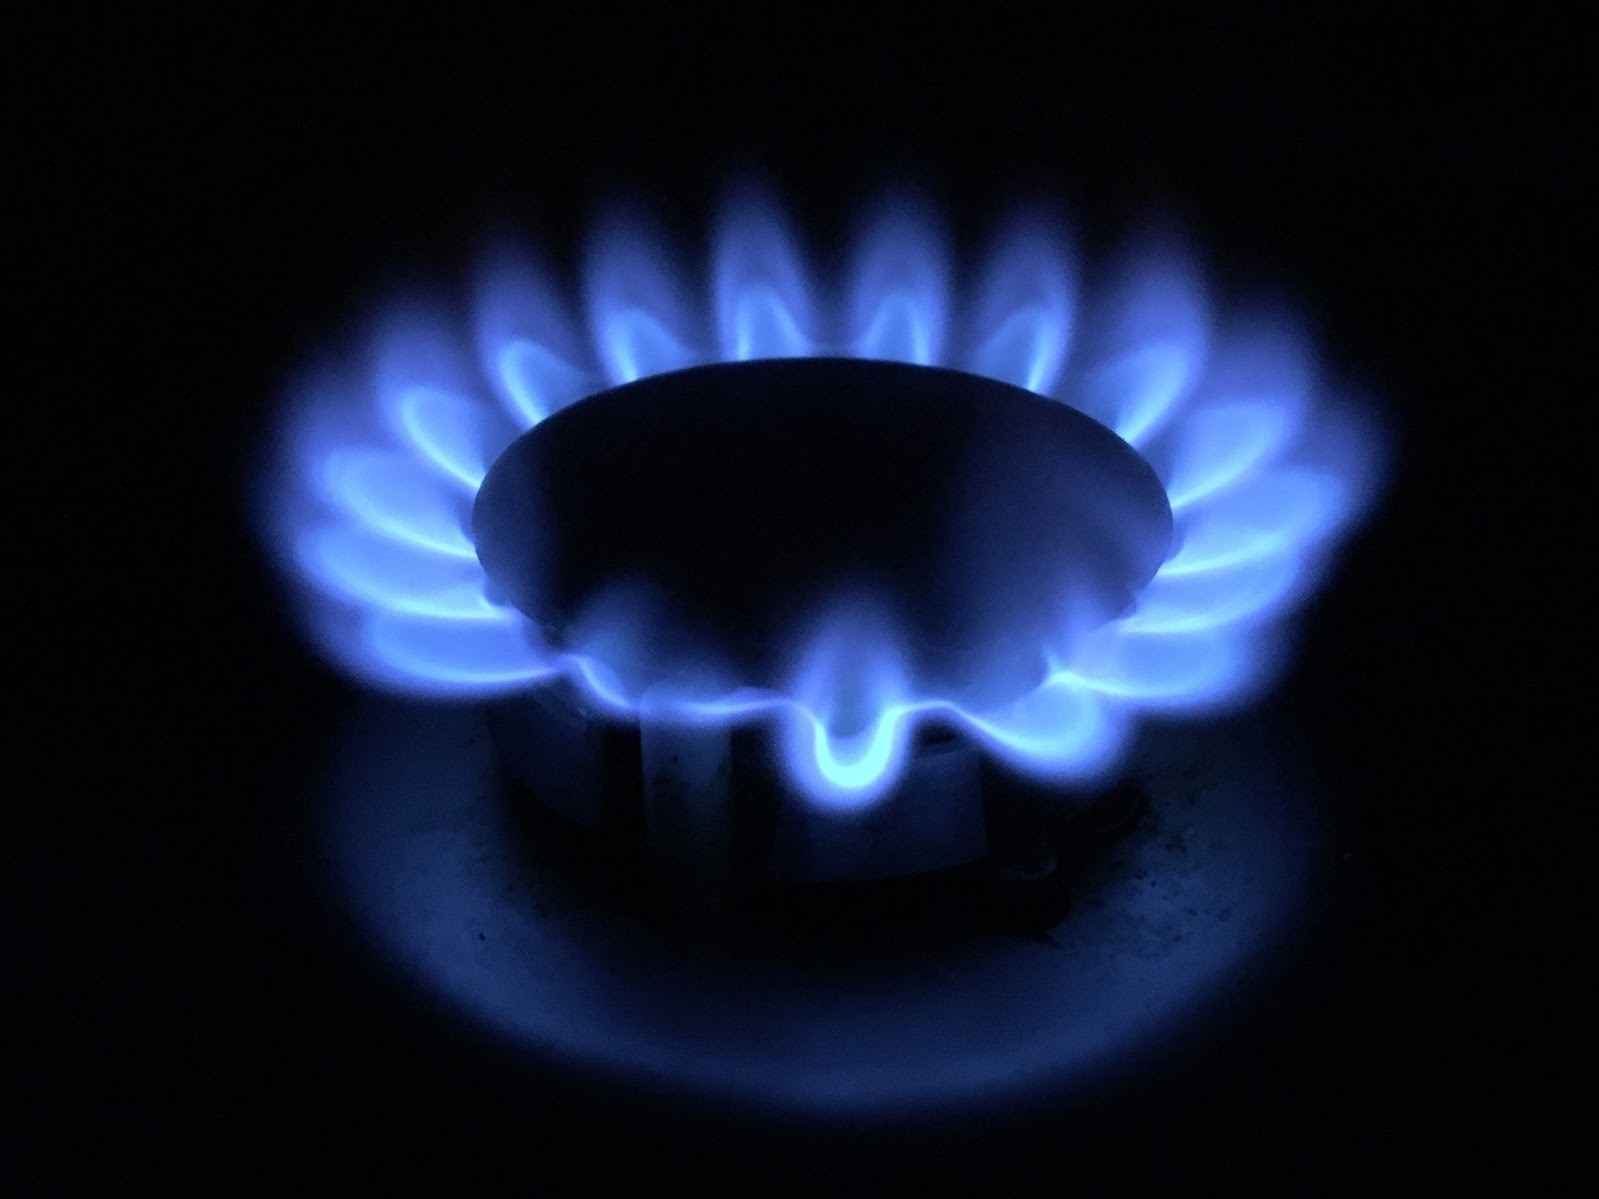 The Price Of Natural Gas In Europe Has Collapsed – It is Already Below 100 Euros